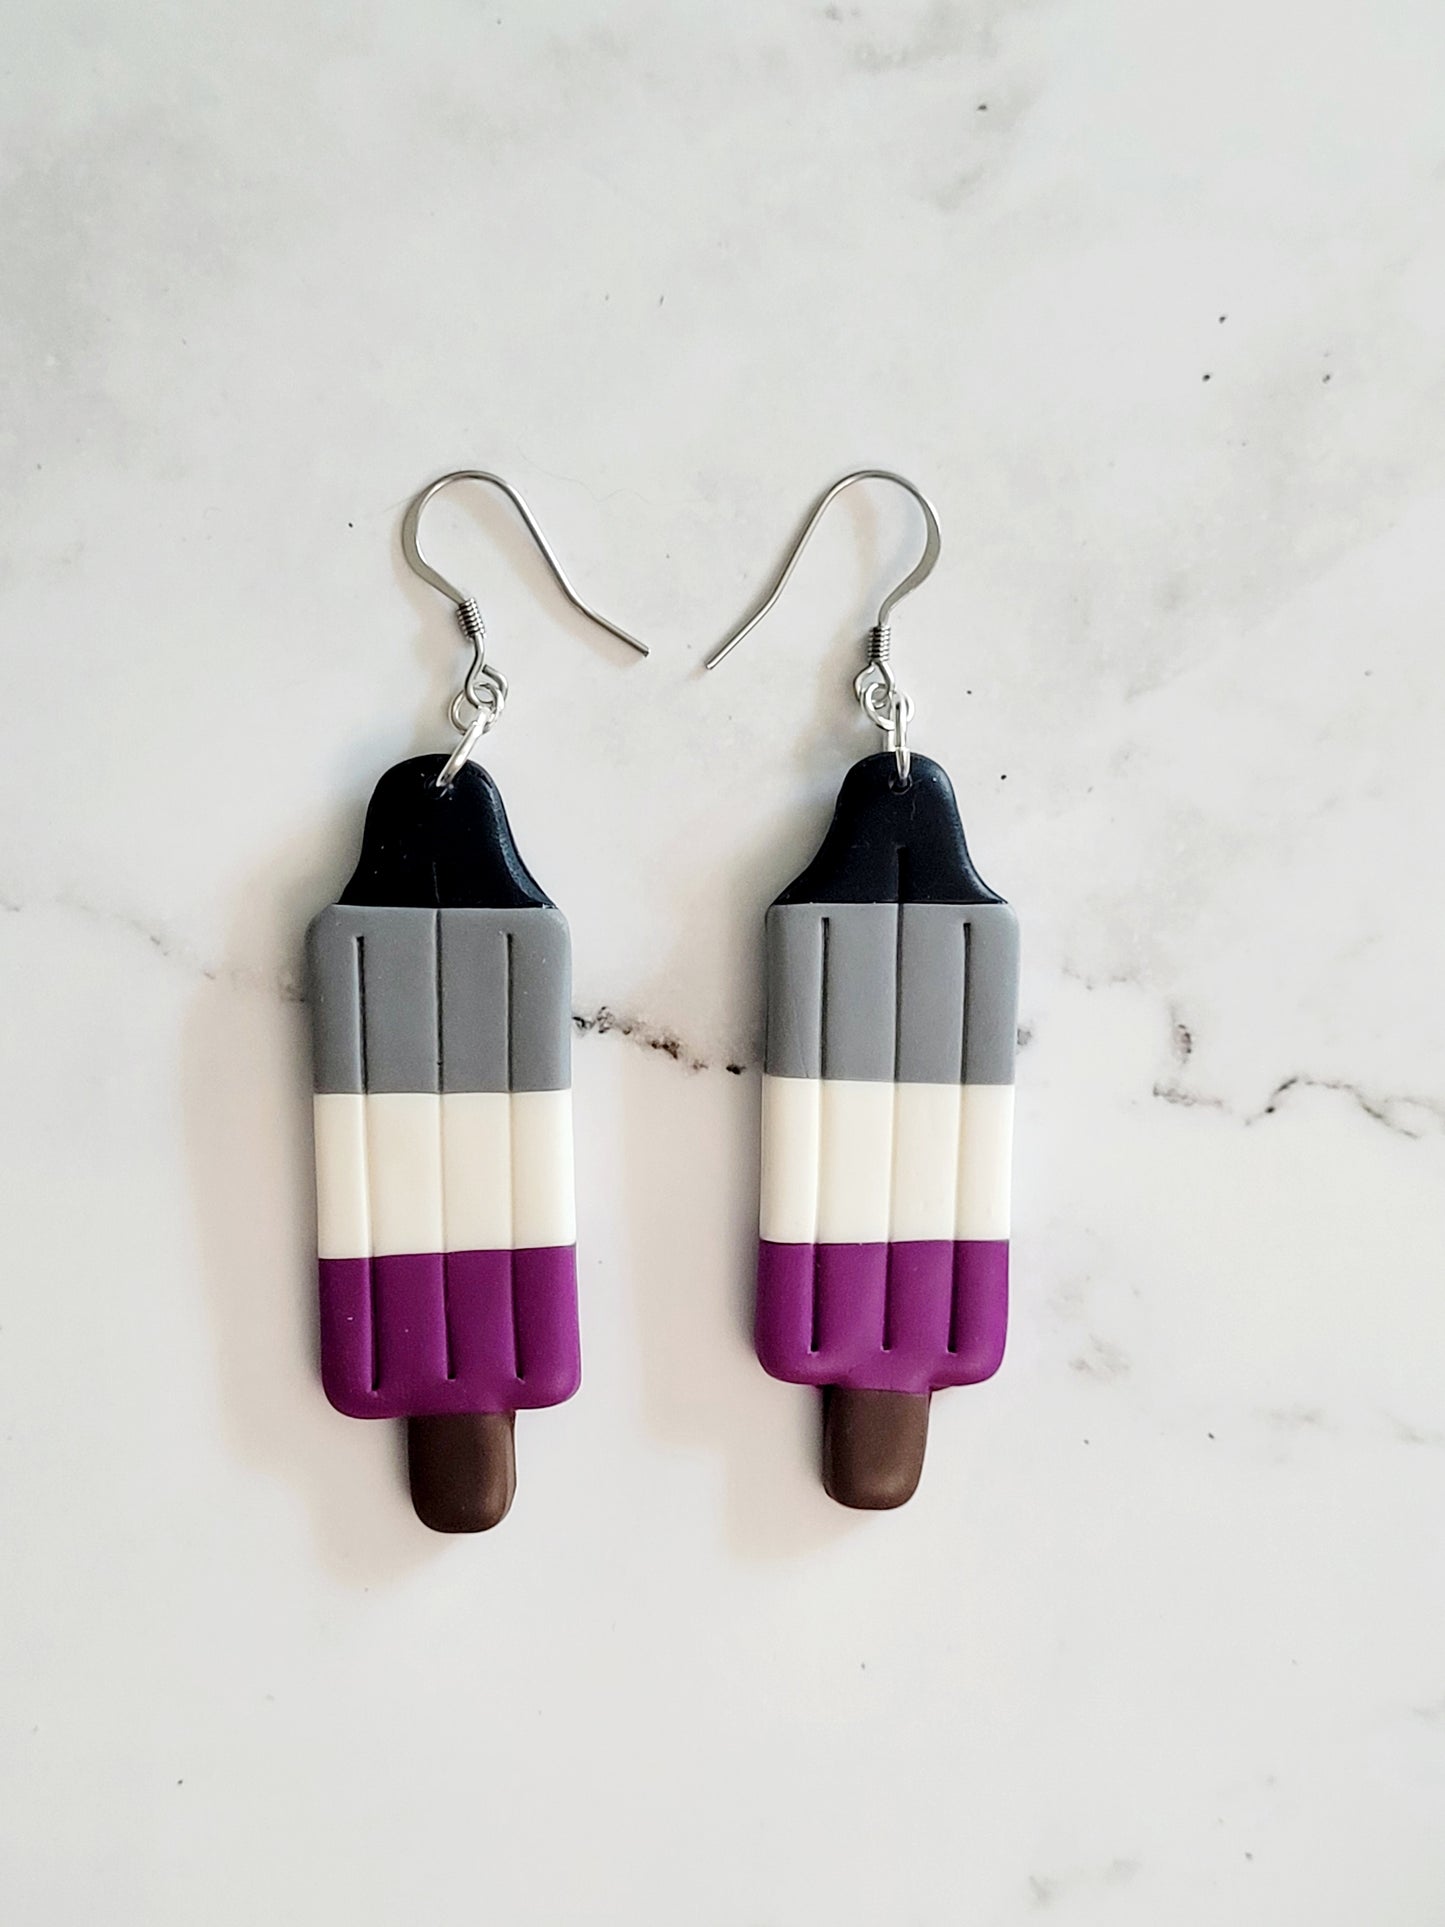 Closeup of the Asexual Pride Flag Bomb Pop Earrings